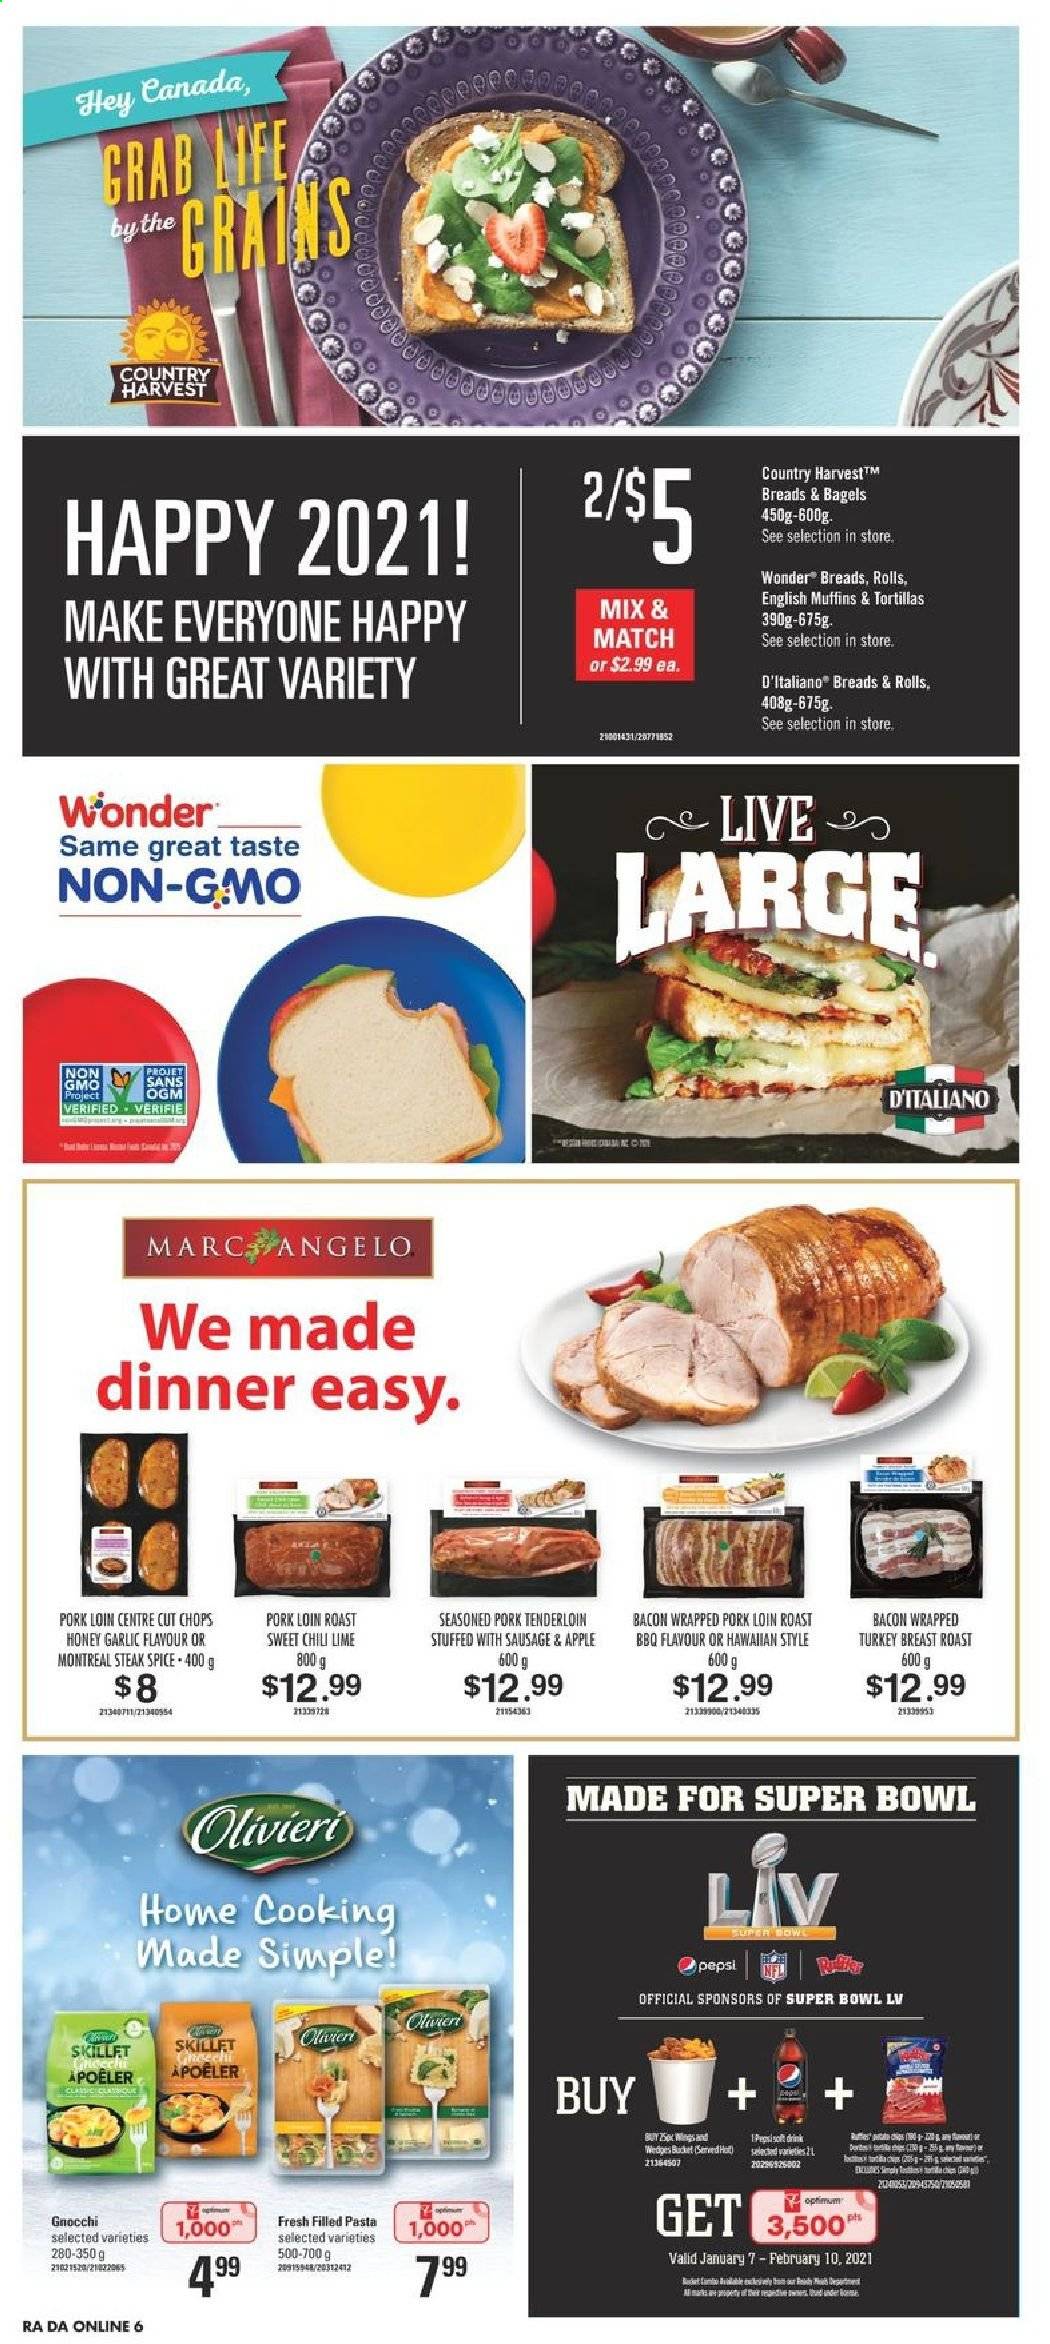 Atlantic Superstore flyer  - January 14, 2021 - January 20, 2021. Page 11.